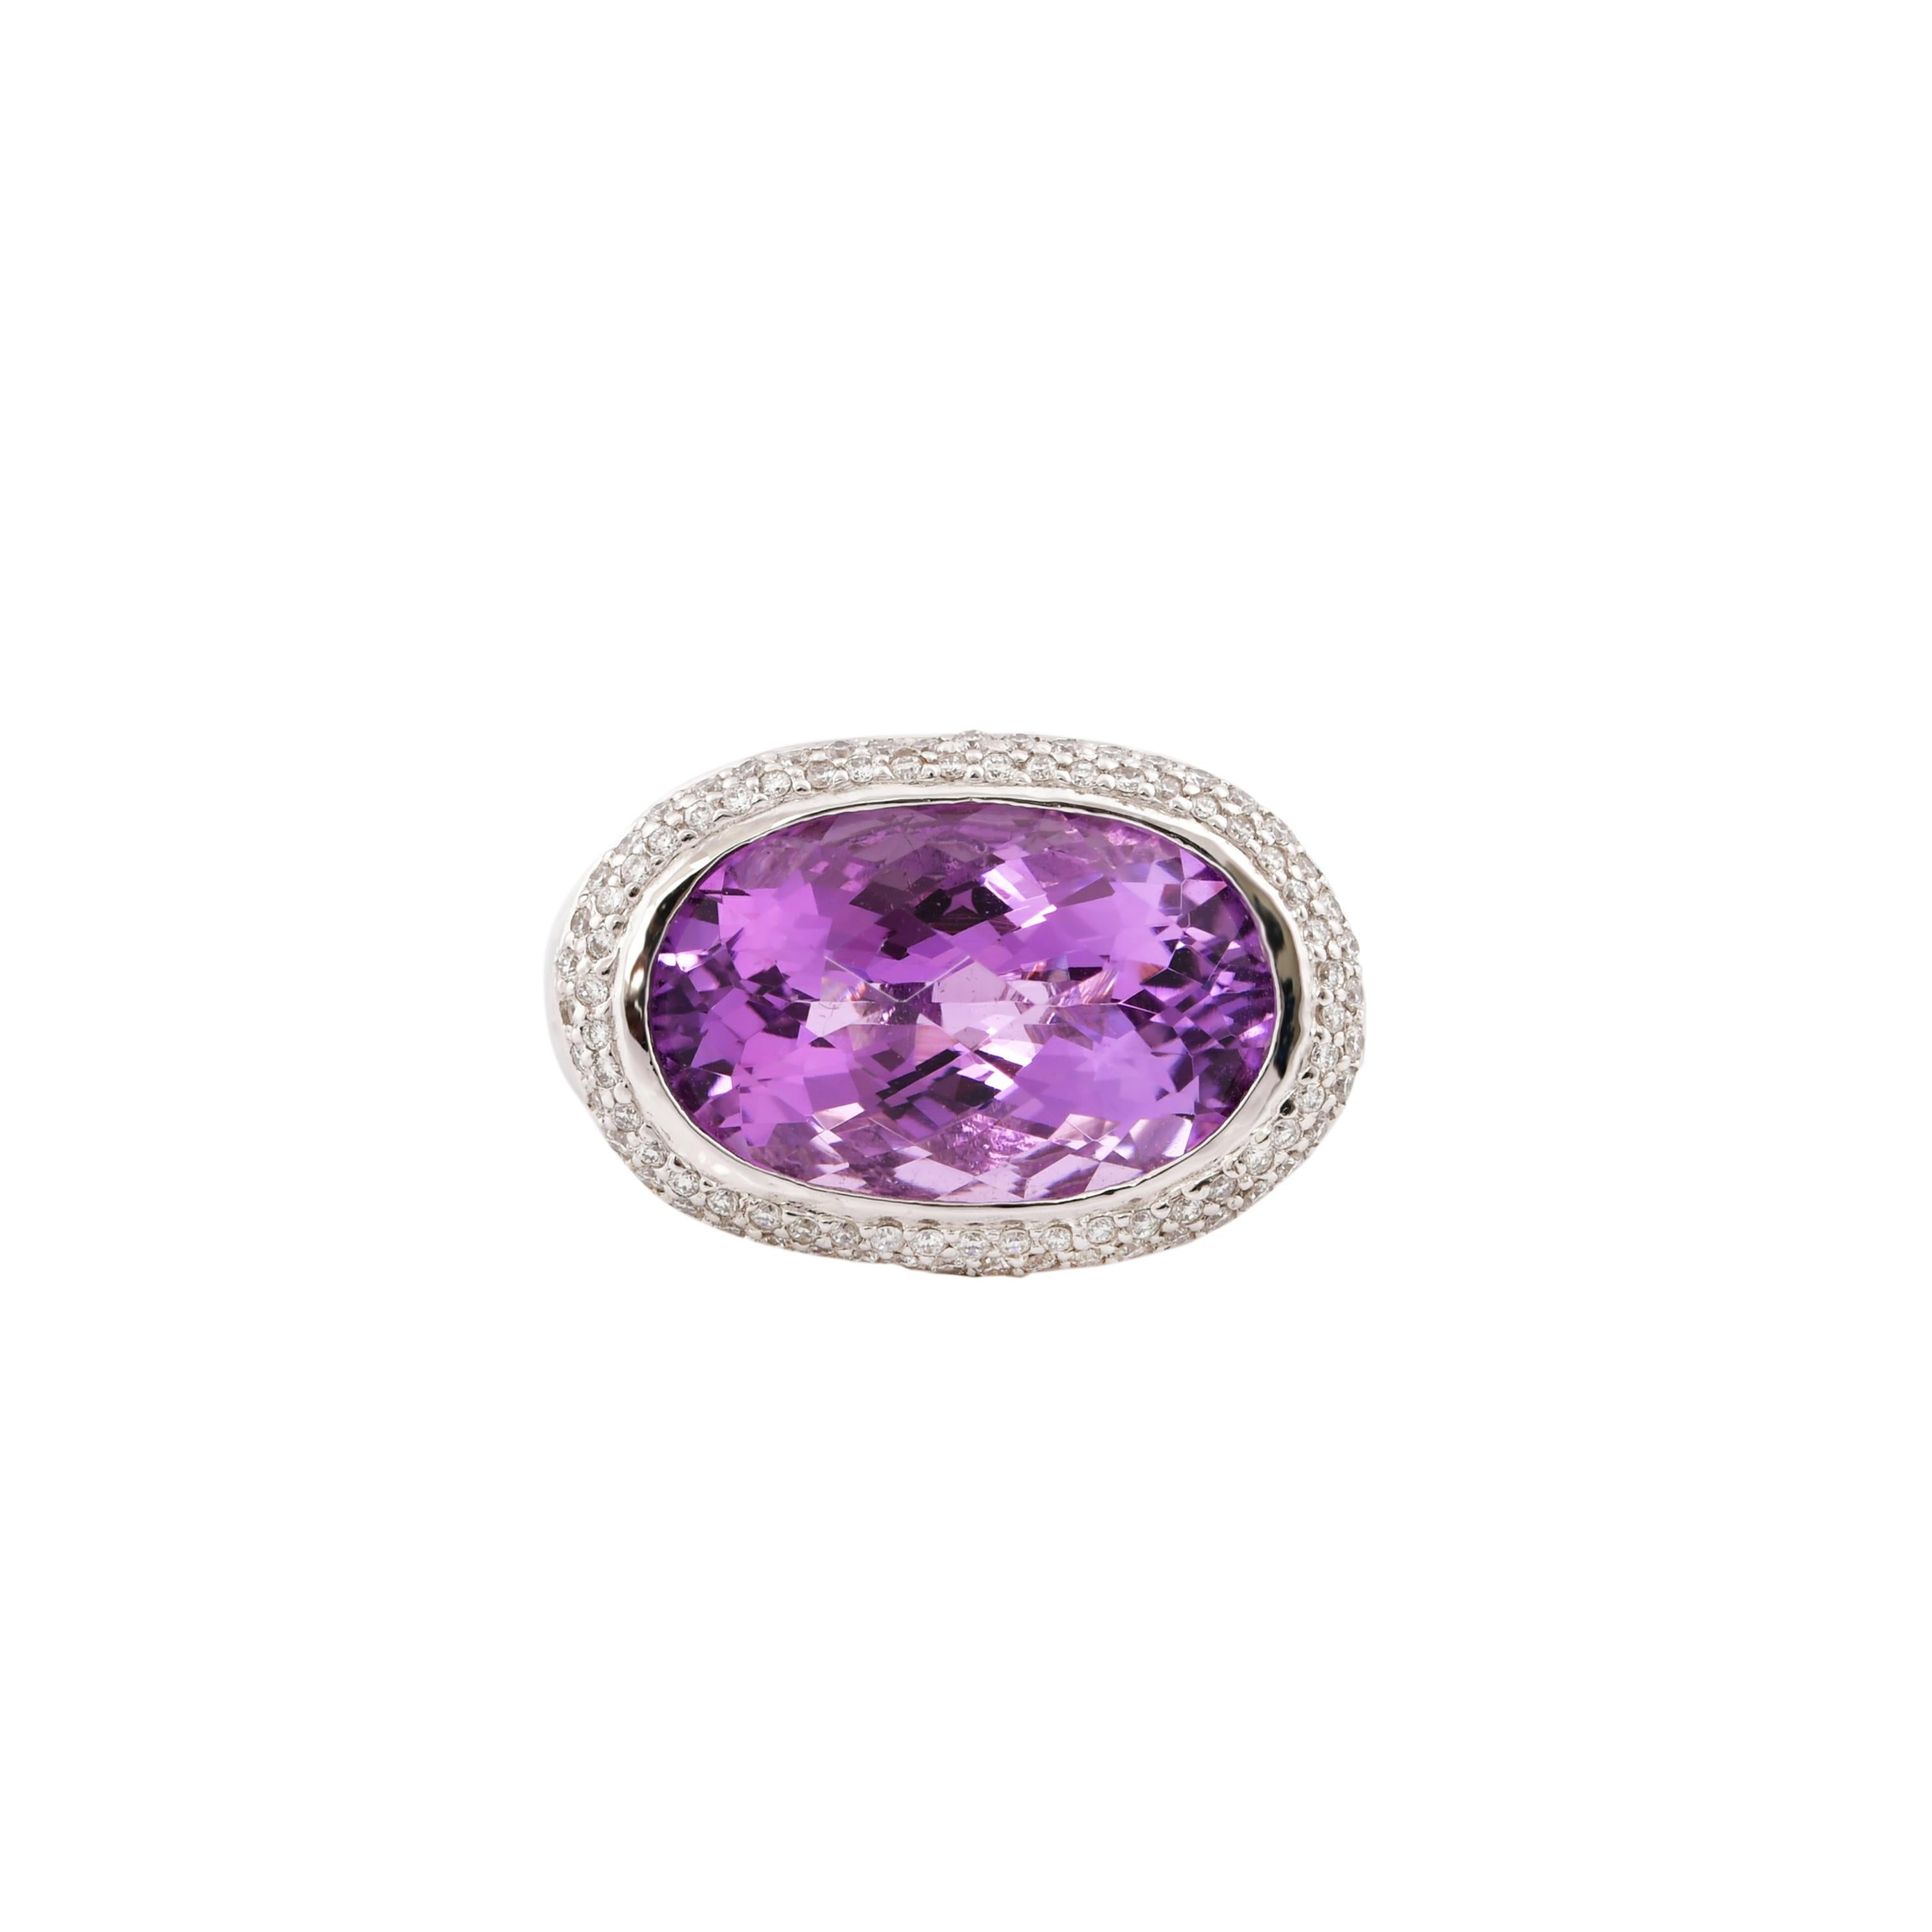 Oval Cut 7.6 Carat Amethyst and Diamond Ring in 14 Karat White Gold For Sale